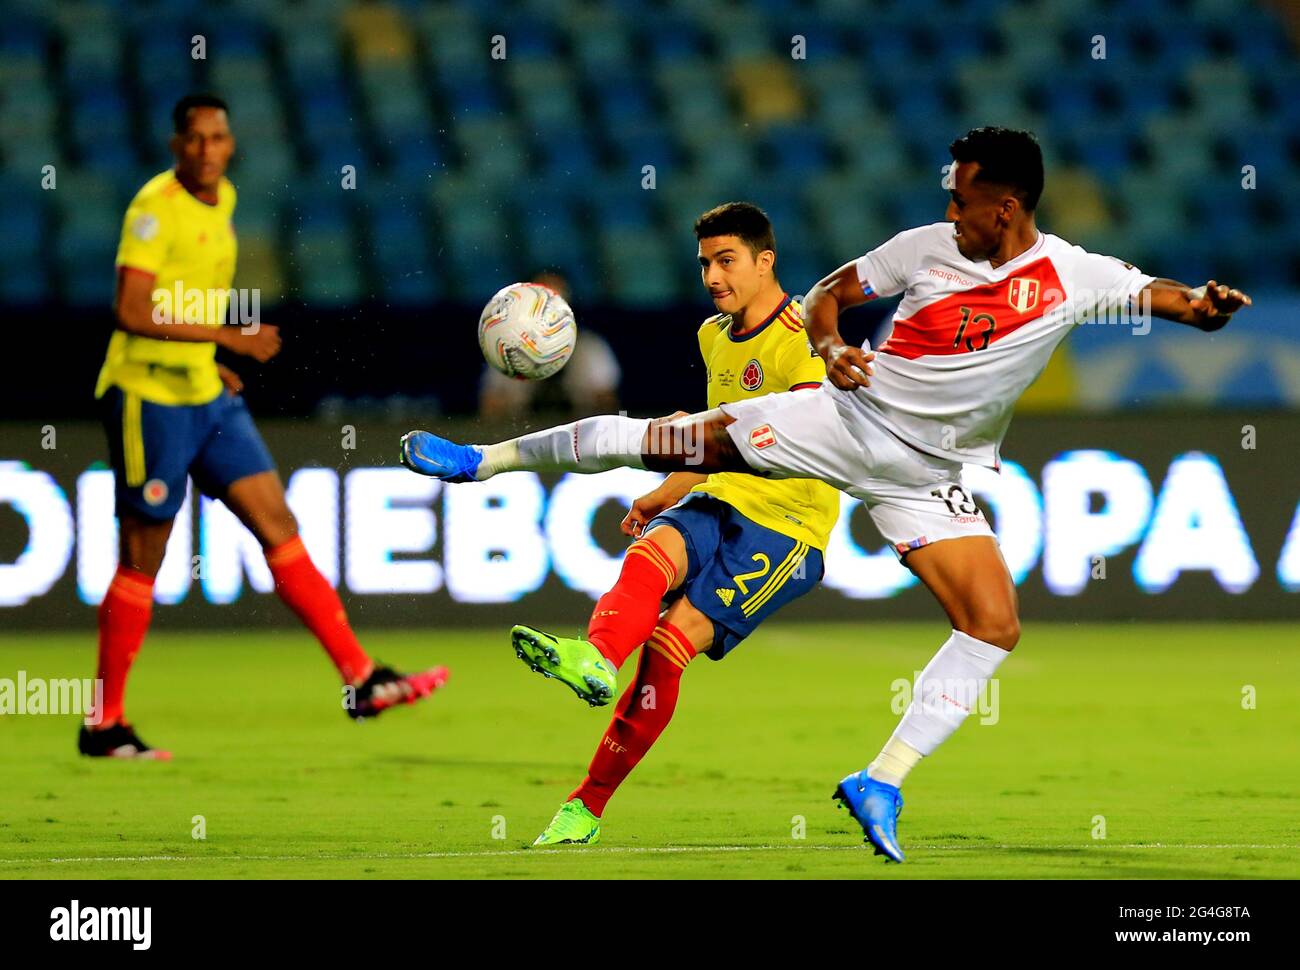 GOIANIA, BRAZIL - JUNE 20: Stefan Medina of Colombia competes for the ball with Renato Tapia of Peru ,during the match between Colombia and Peru as part of Conmebol Copa America Brazil 2021 at Estadio Olimpico on June 20, 2021 in Goiania, Brazil. (MB Media) Stock Photo